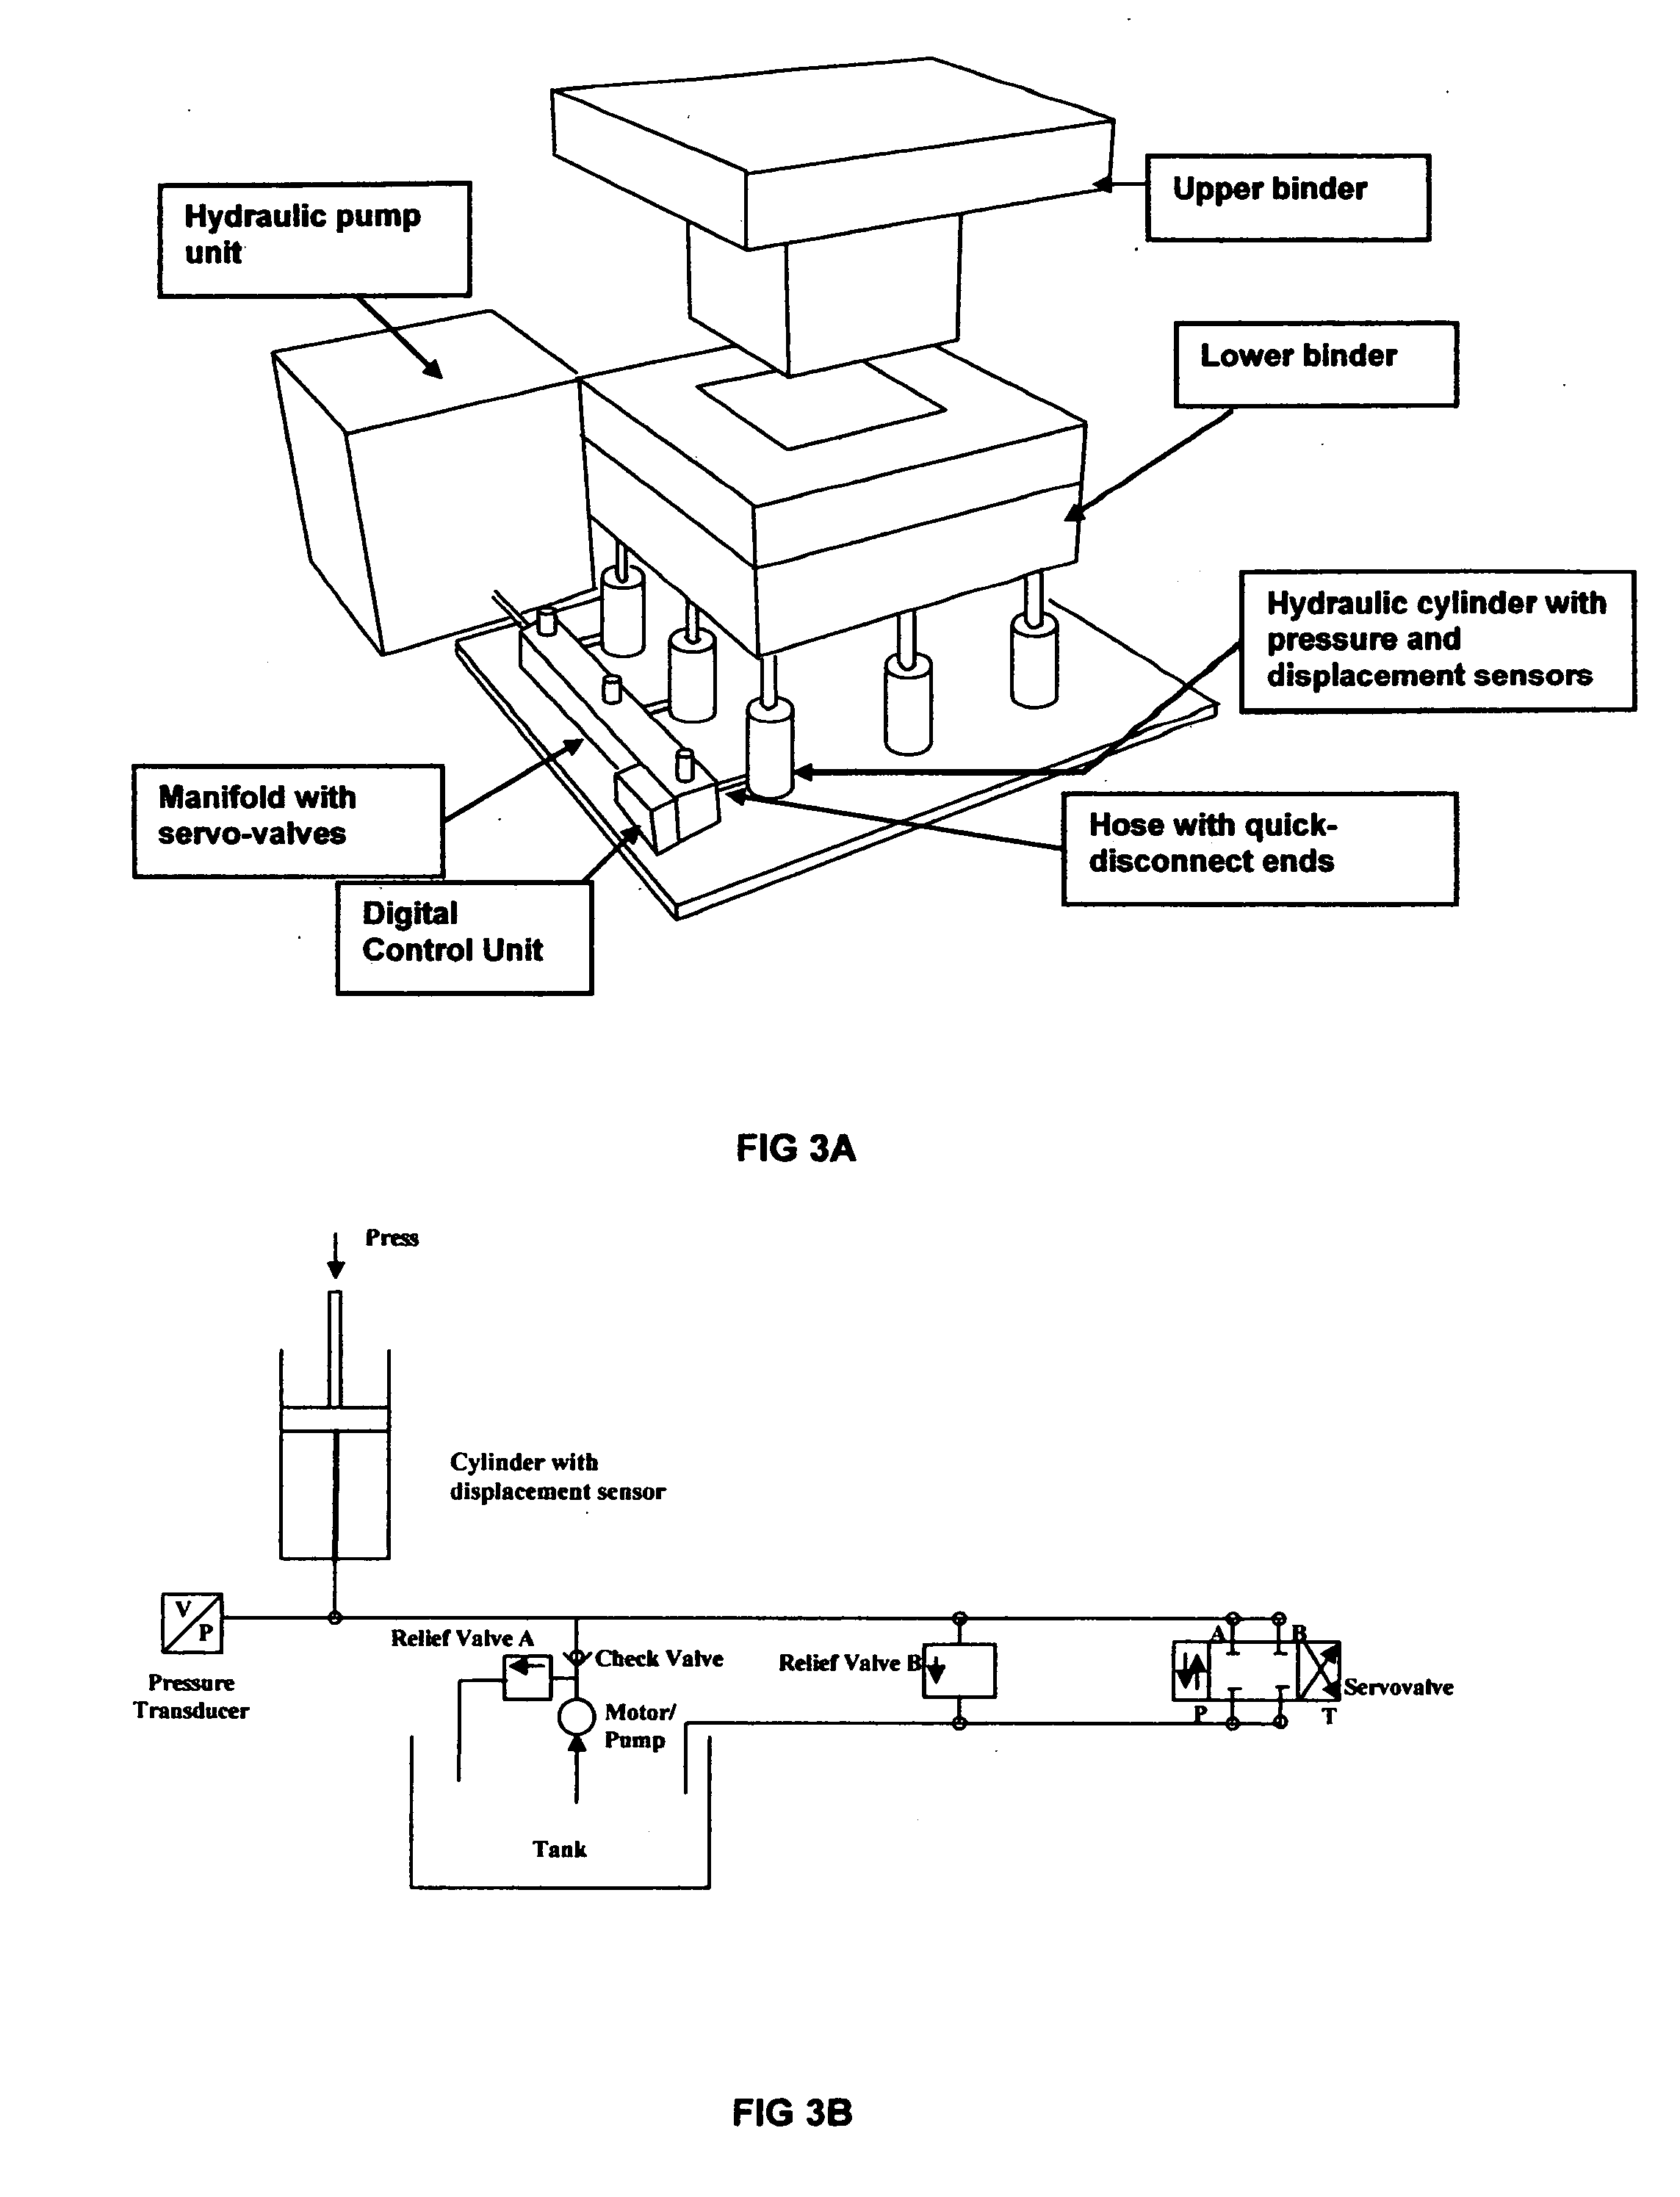 Reconfigurable variable blank-holder force system and method for sheet metal stamping